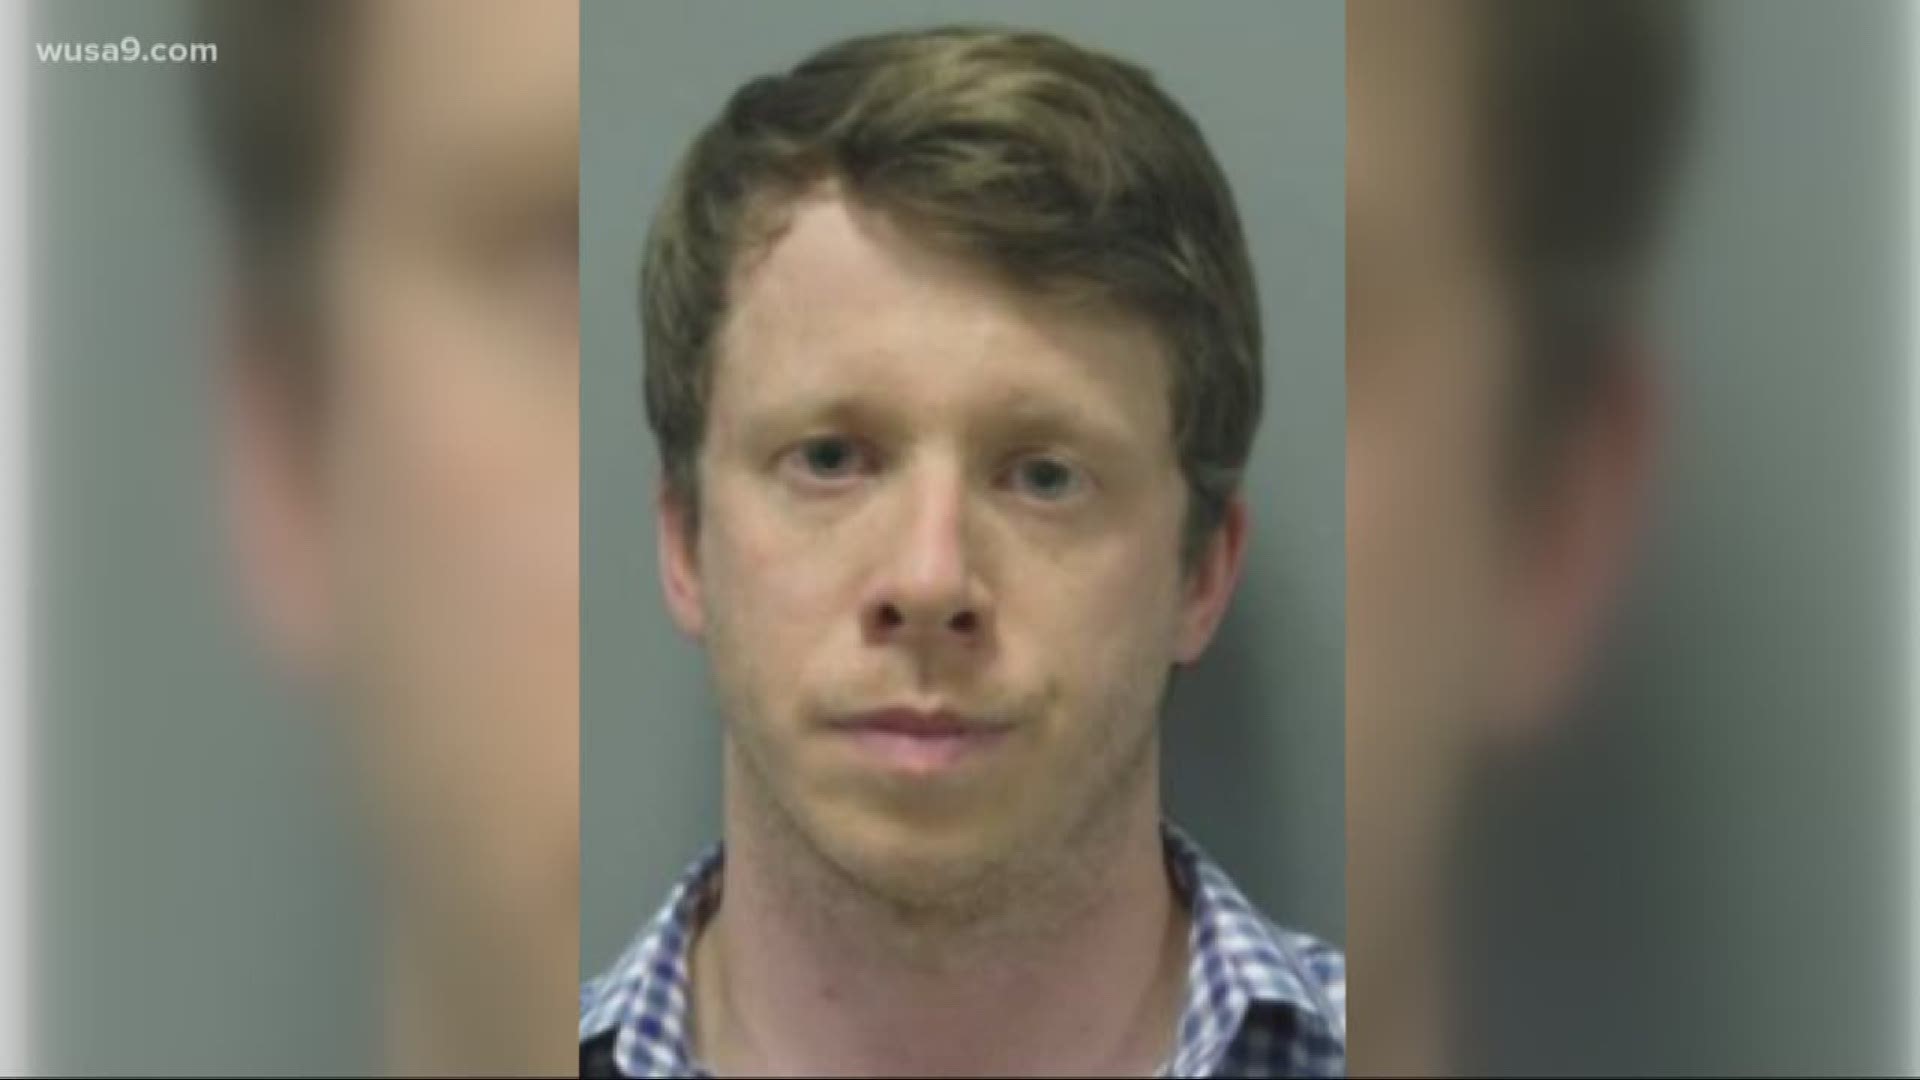 Montgomery County Police say Mark David Peay met a 14-year-old girl using social media. Then paid her in exchange for sex during a meeting at a Silver Spring hotel in April.